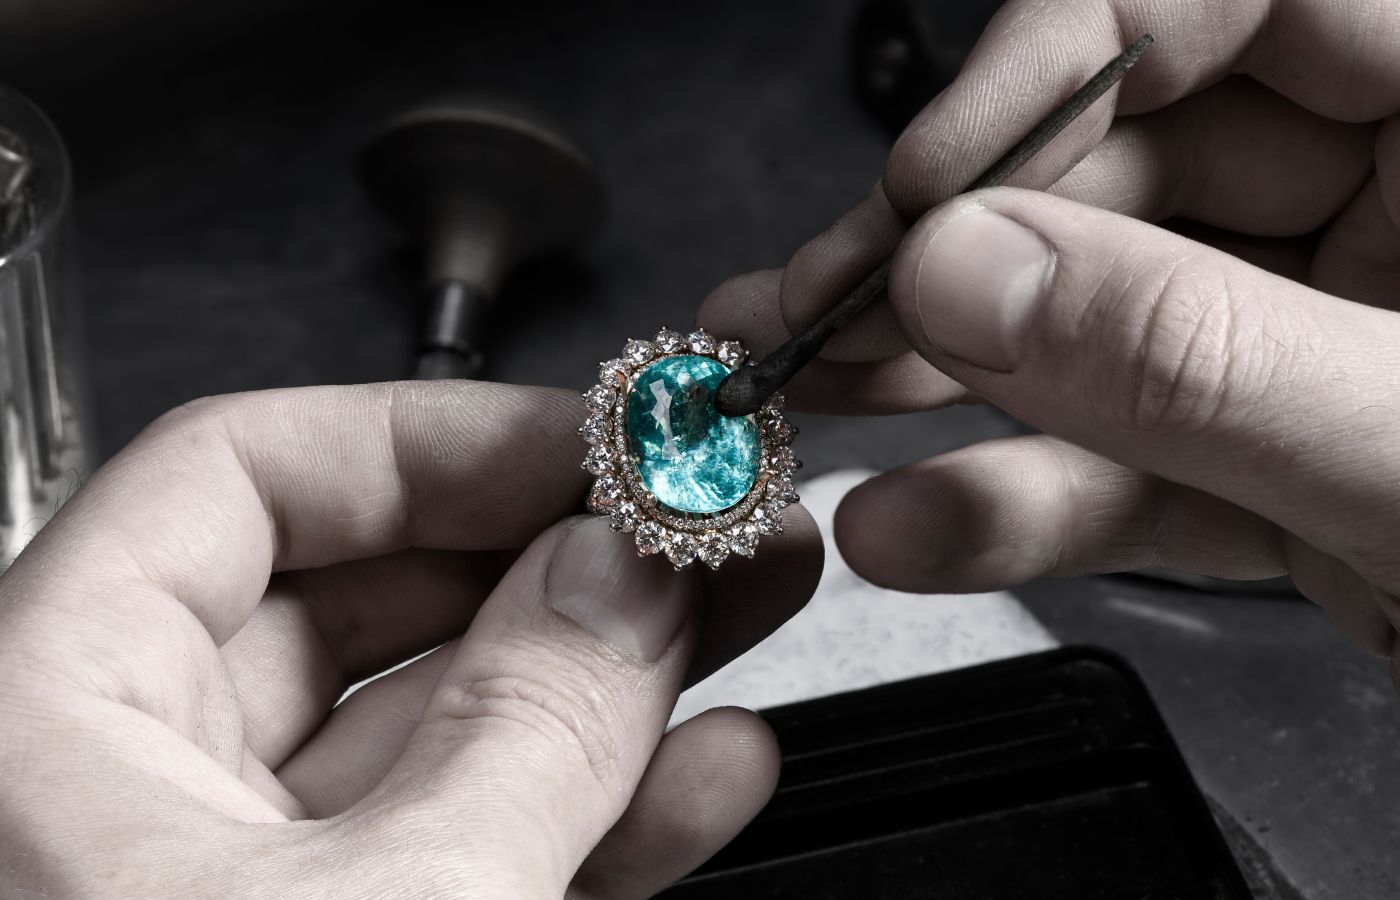 Making of a Parure Atelier High Jewellery ring featuring a 19.76-ct Paraiba tourmaline